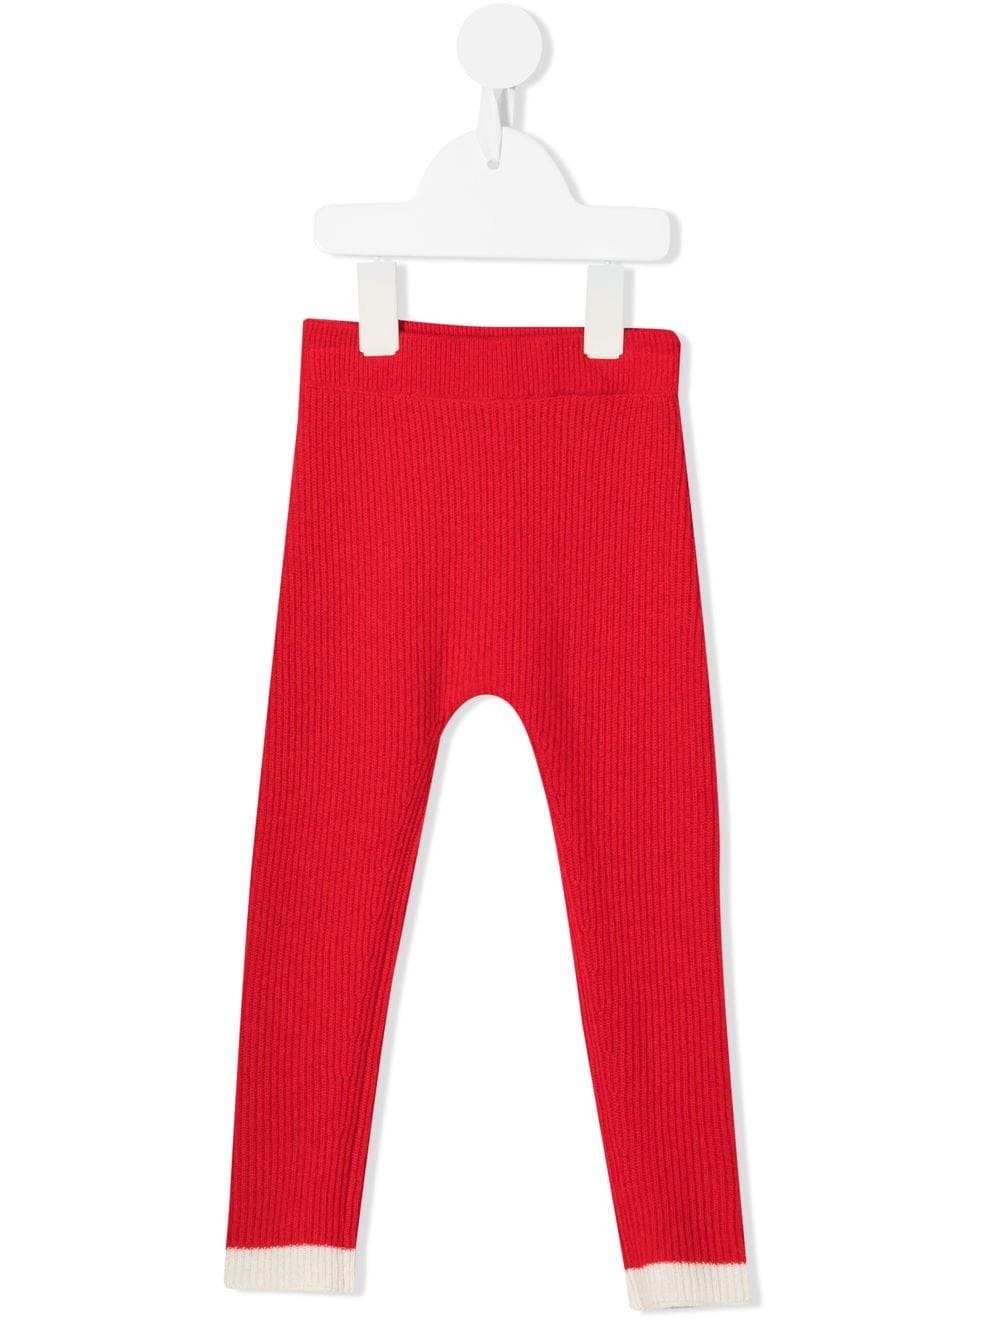 Shop Cashmere In Love Gia Cashmere Leggings In Red